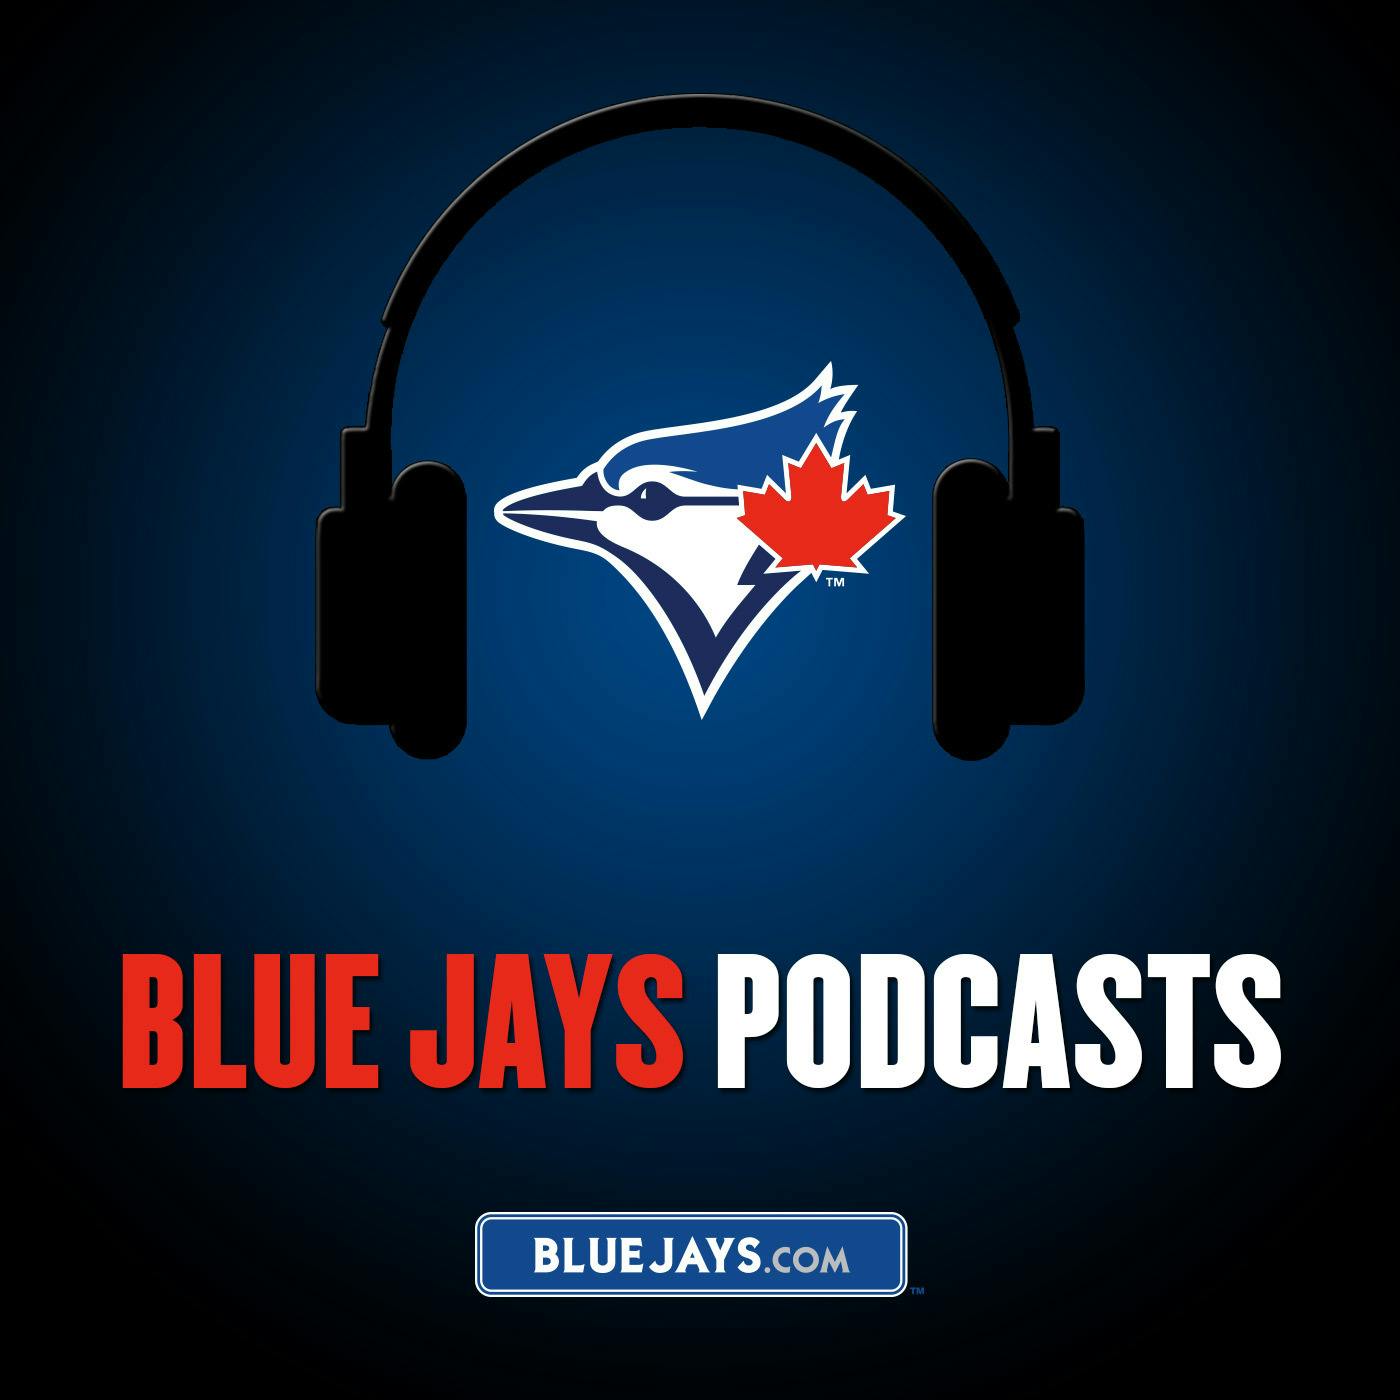 2/7/19: Blue Jays Extras | Starting rotation preview